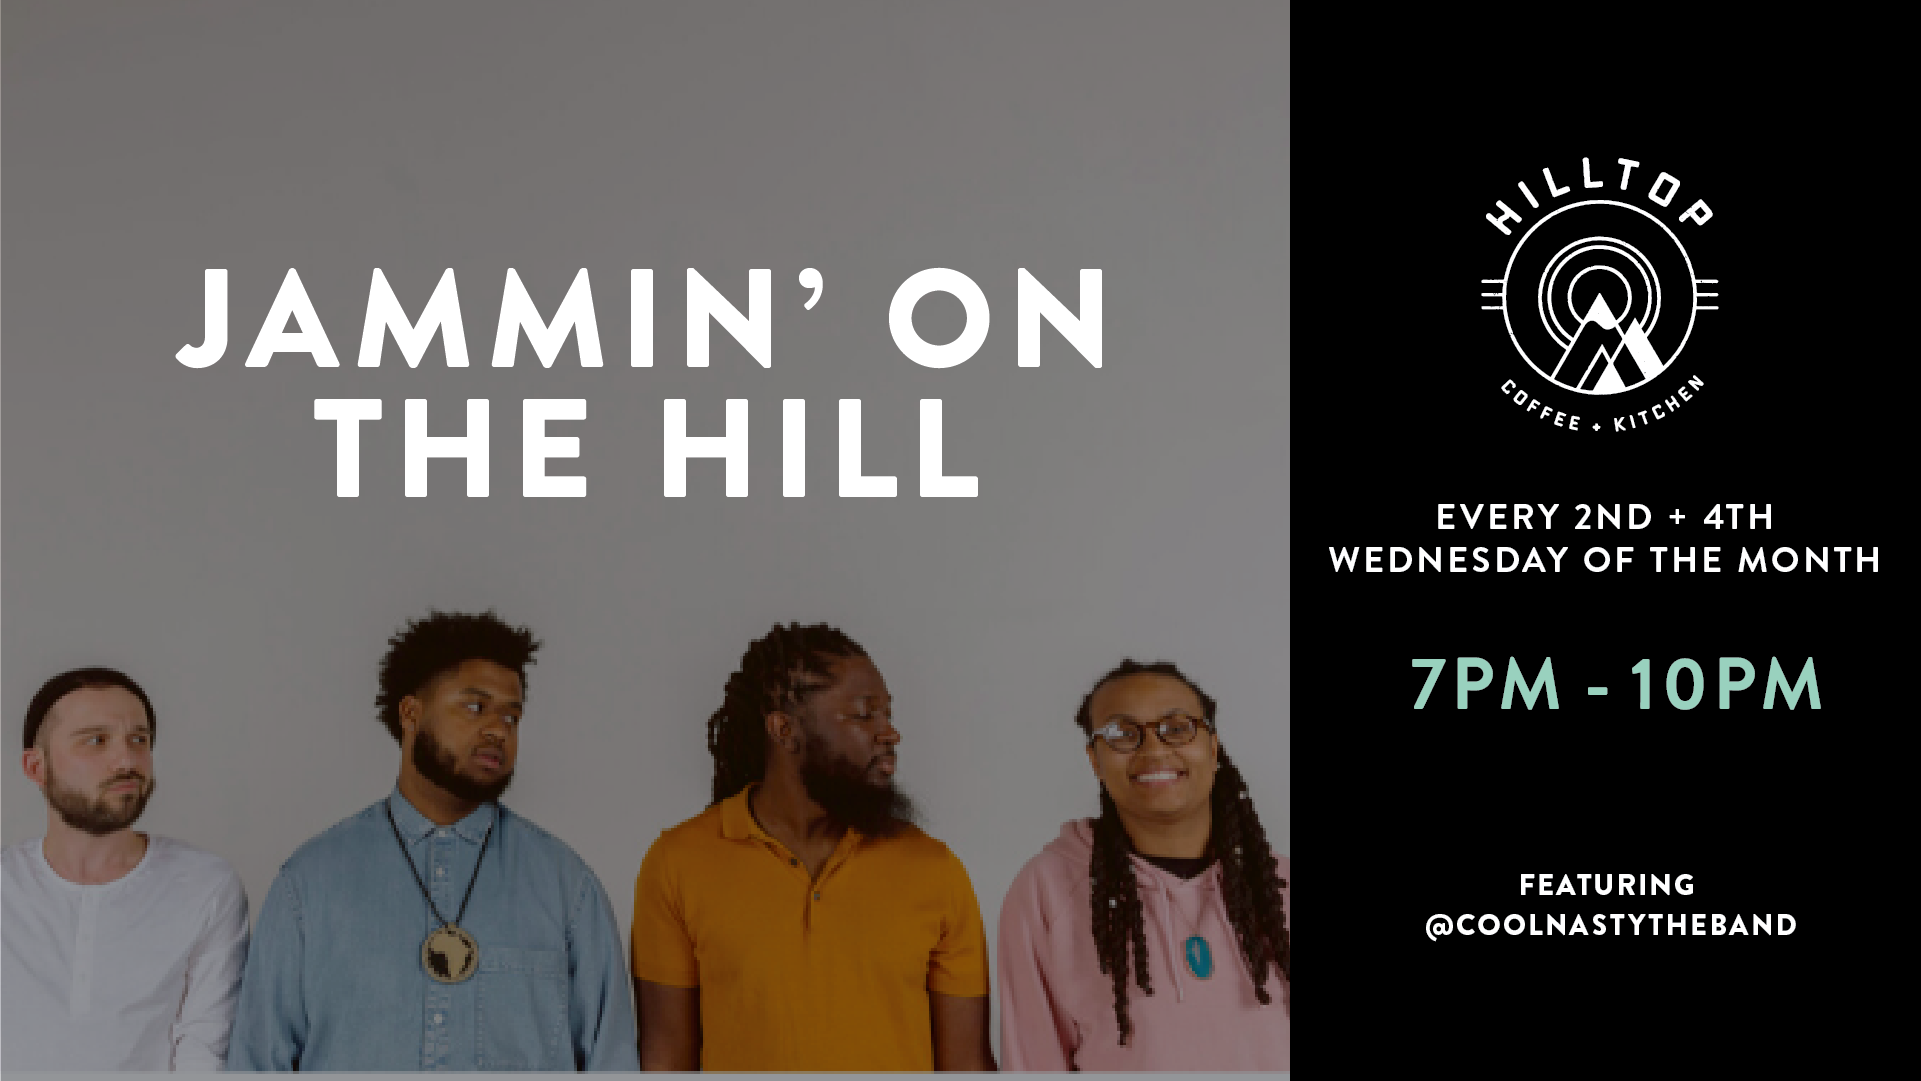 Hilltop Live Presents Jammin' on the Hill: Open Mic + Jam Session